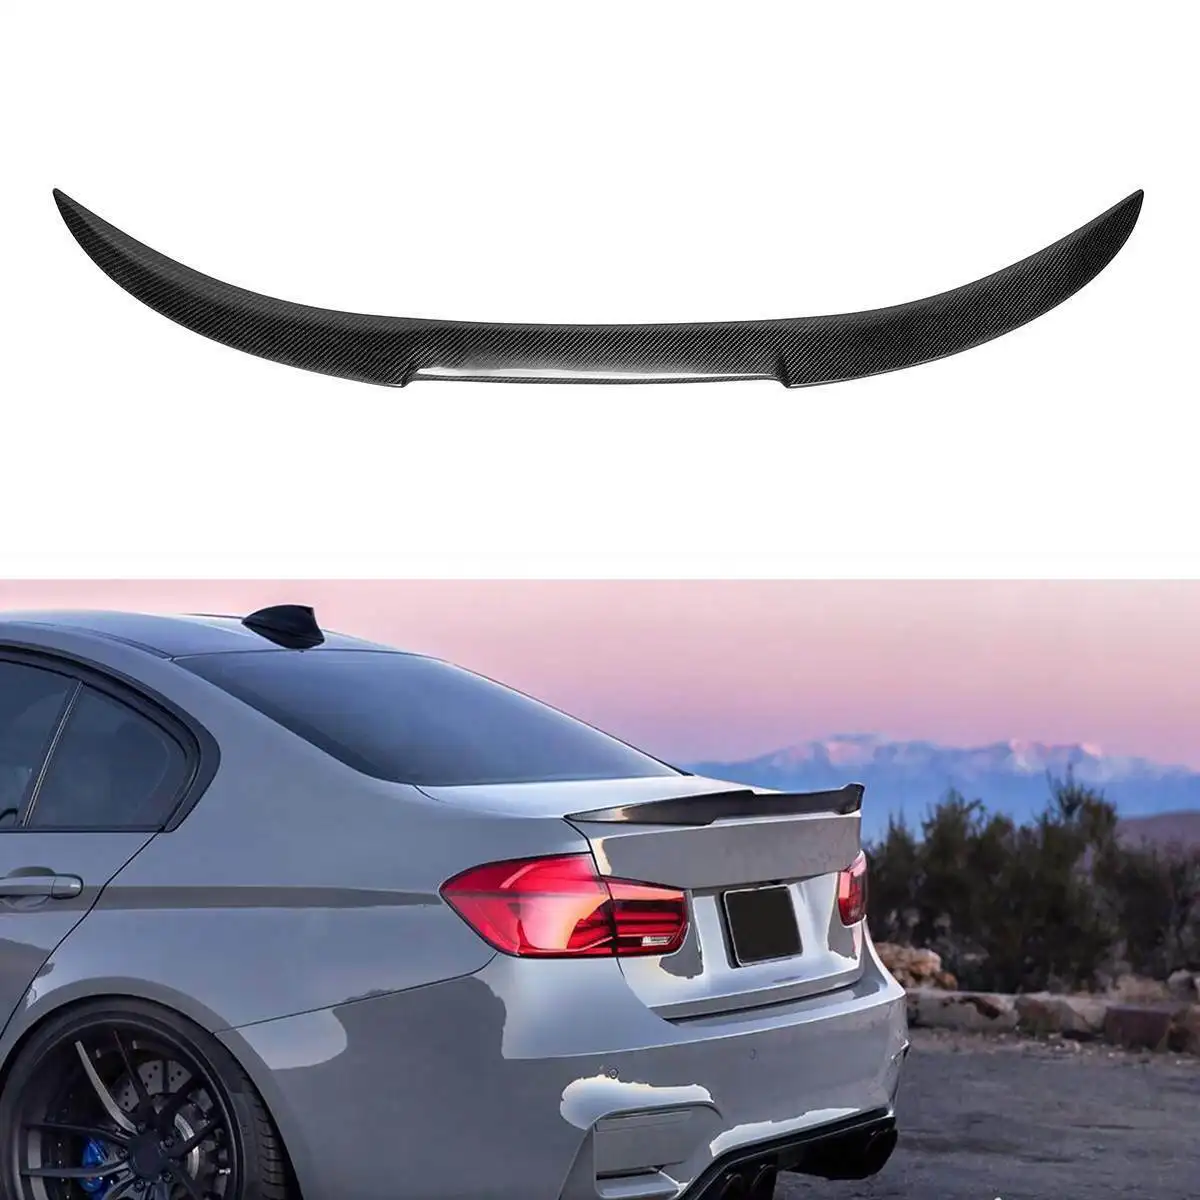 Plastic ABS glossy black or carbon fiber look MP M-Performance PSM M4 style rear spoiler for BMW 3 series F30 F35 2012 2013 2014